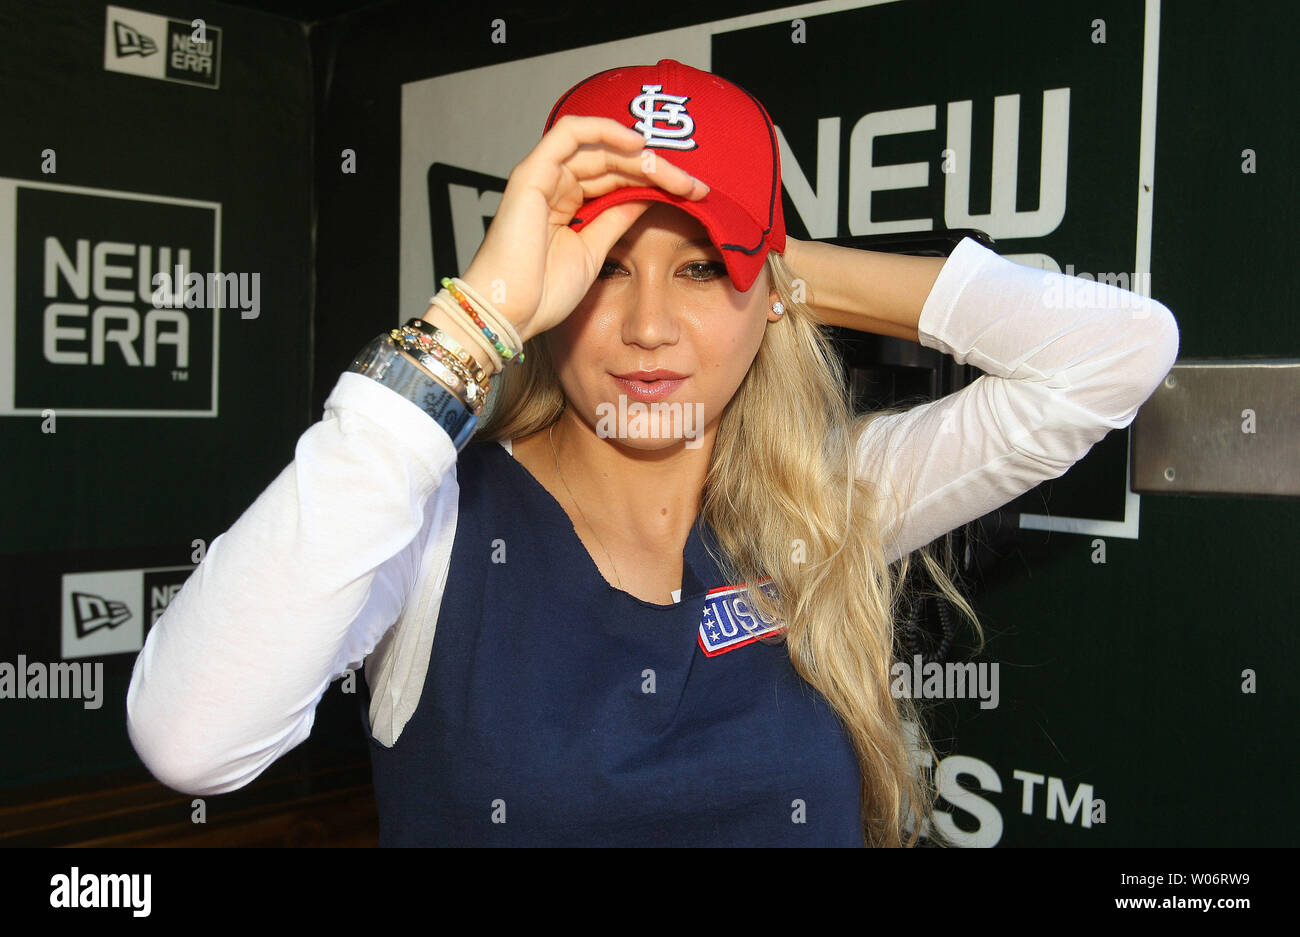 World Team Tennis player Anna Kournikova tries on a Cardinals hat in the dugout before the Los Angeles Dodgers - St. Louis Cardinals baseball game at Busch Stadium in St. Louis on July 17, 2010. UPI/Bill Greenblatt Stock Photo